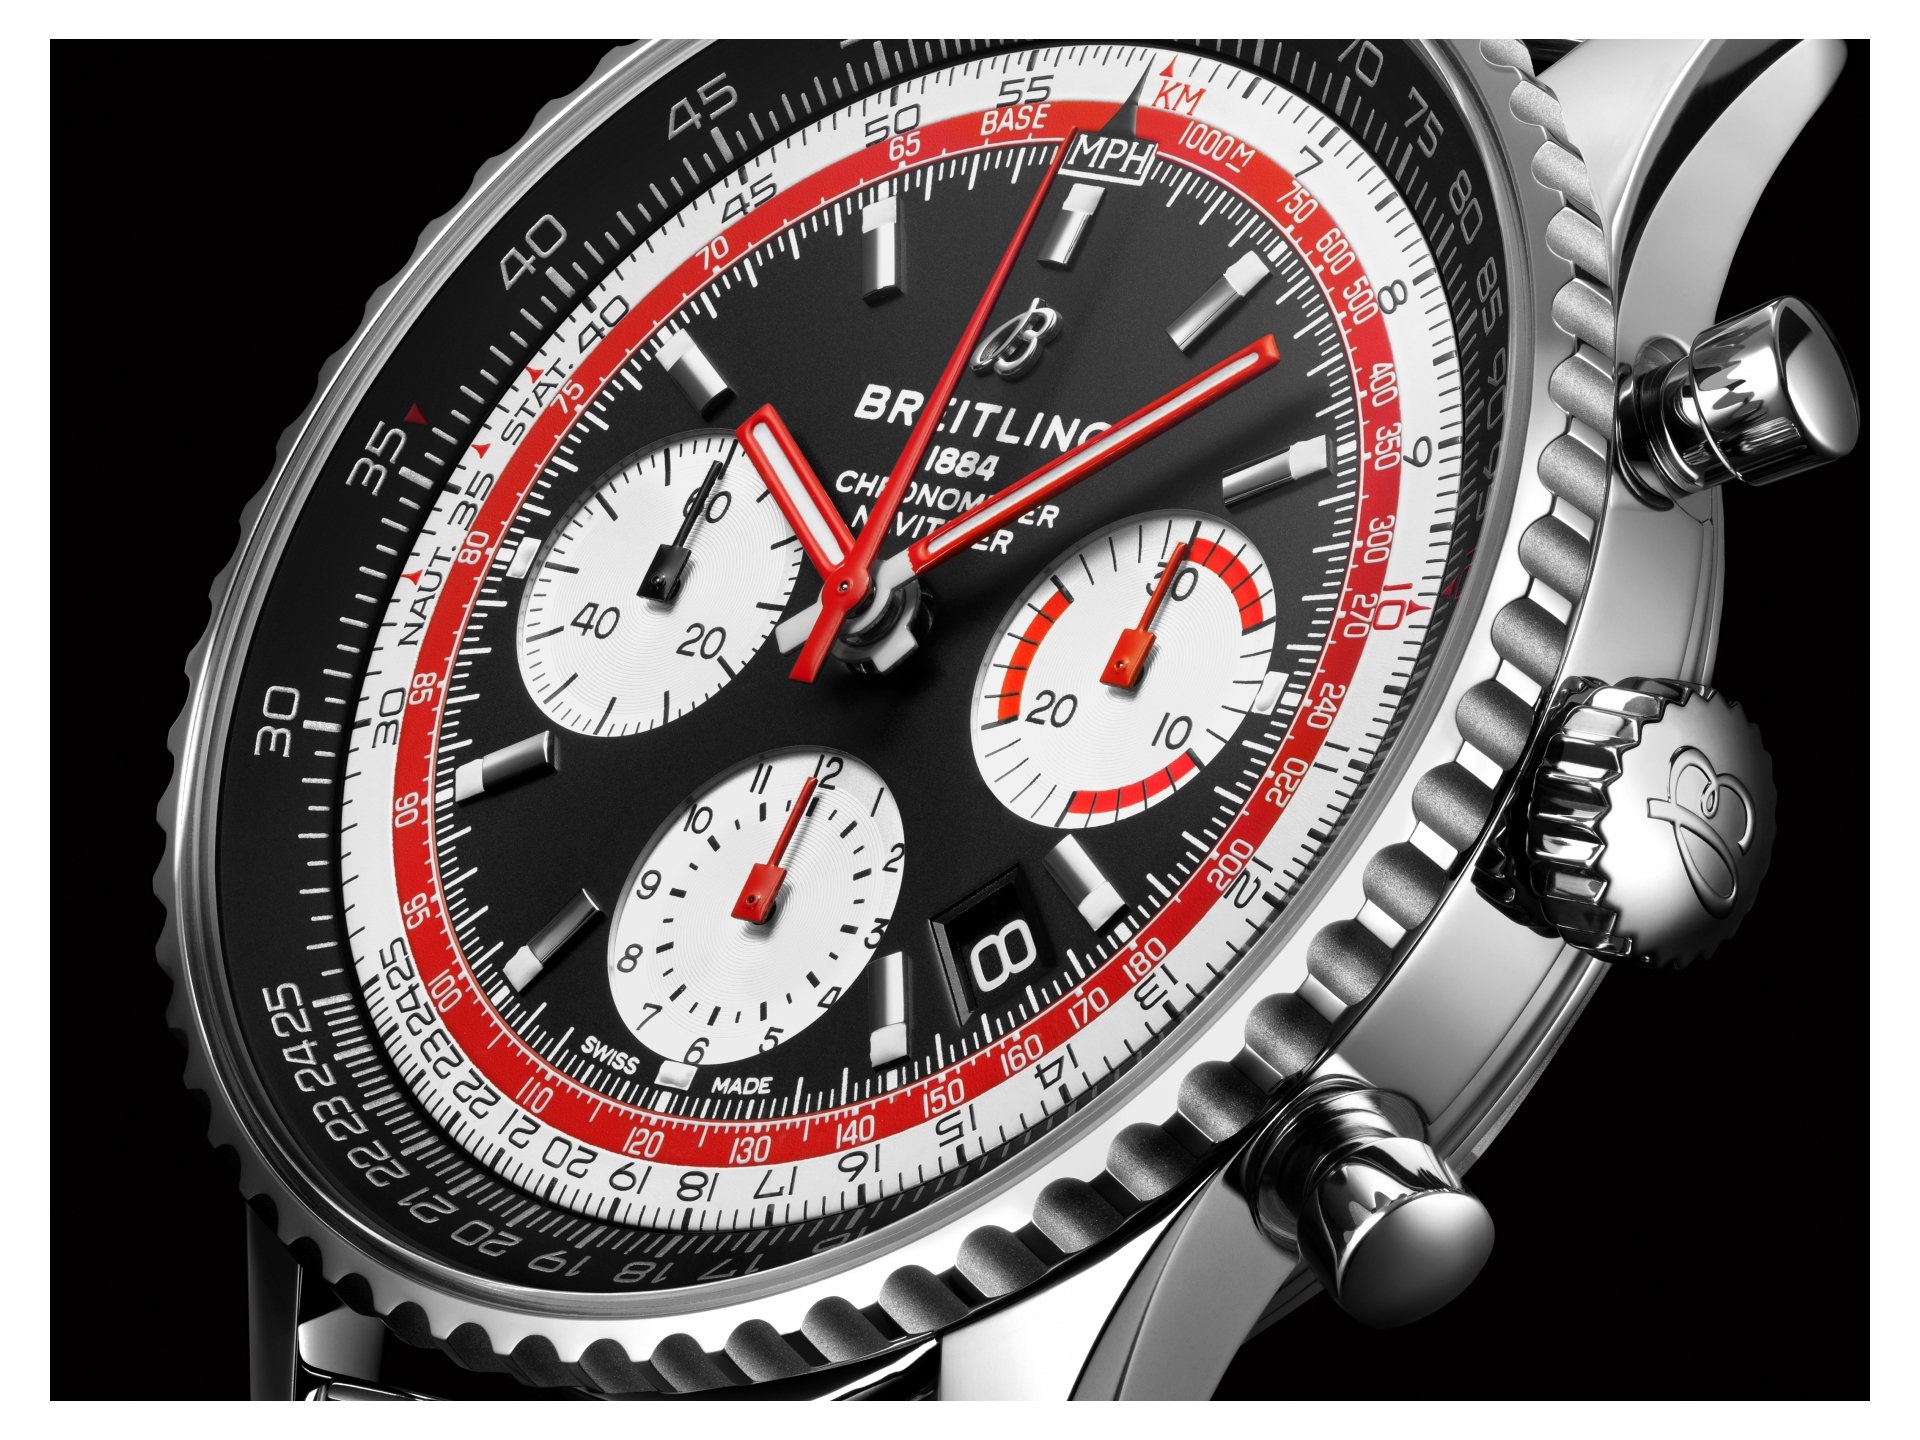 How To Tell The Difference Between A Real Breitling Watch And A Fake